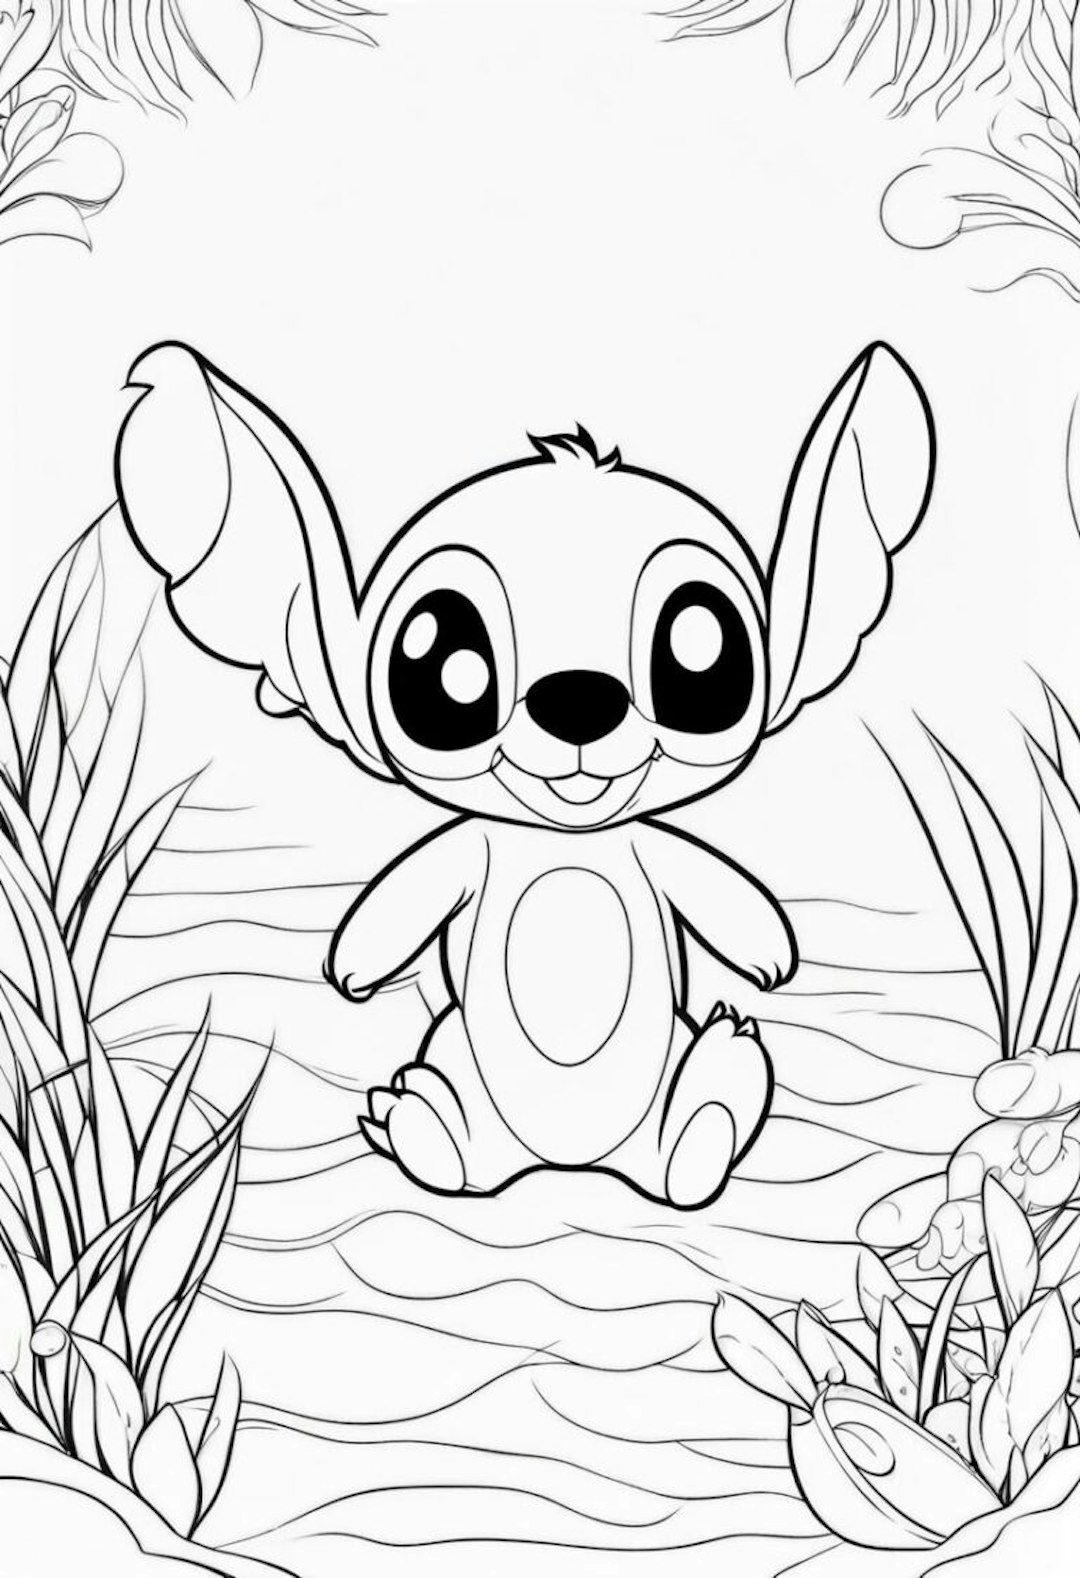 Stitch’s Tropical Adventure Coloring Page coloring pages